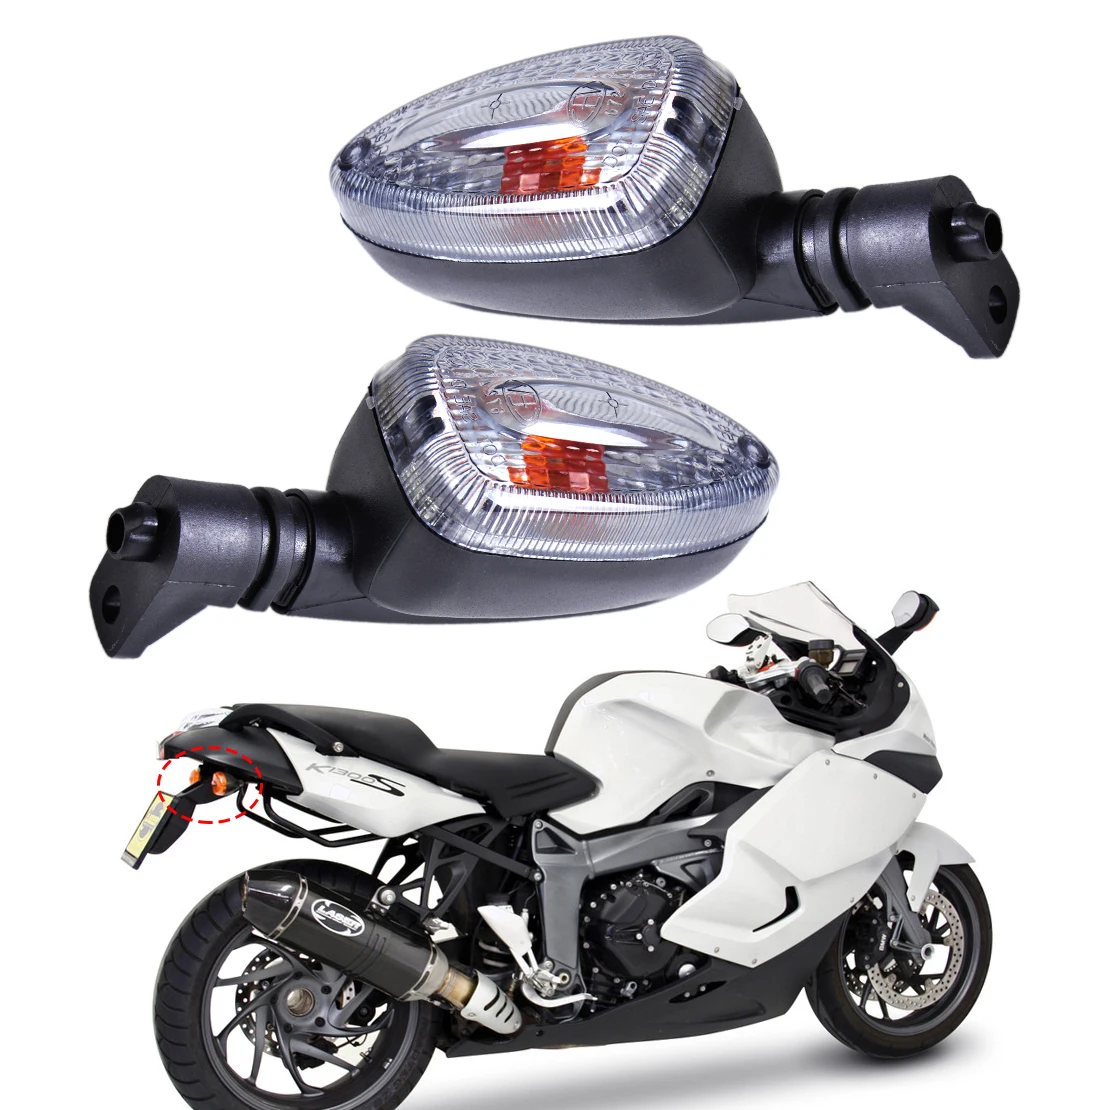 New 1Pair Motorcycle Clear Turn Signal Indicator Light Lamp Fit for BMW F650GS F800S K1300S R1200R G450X R1200GS K1200R F800ST